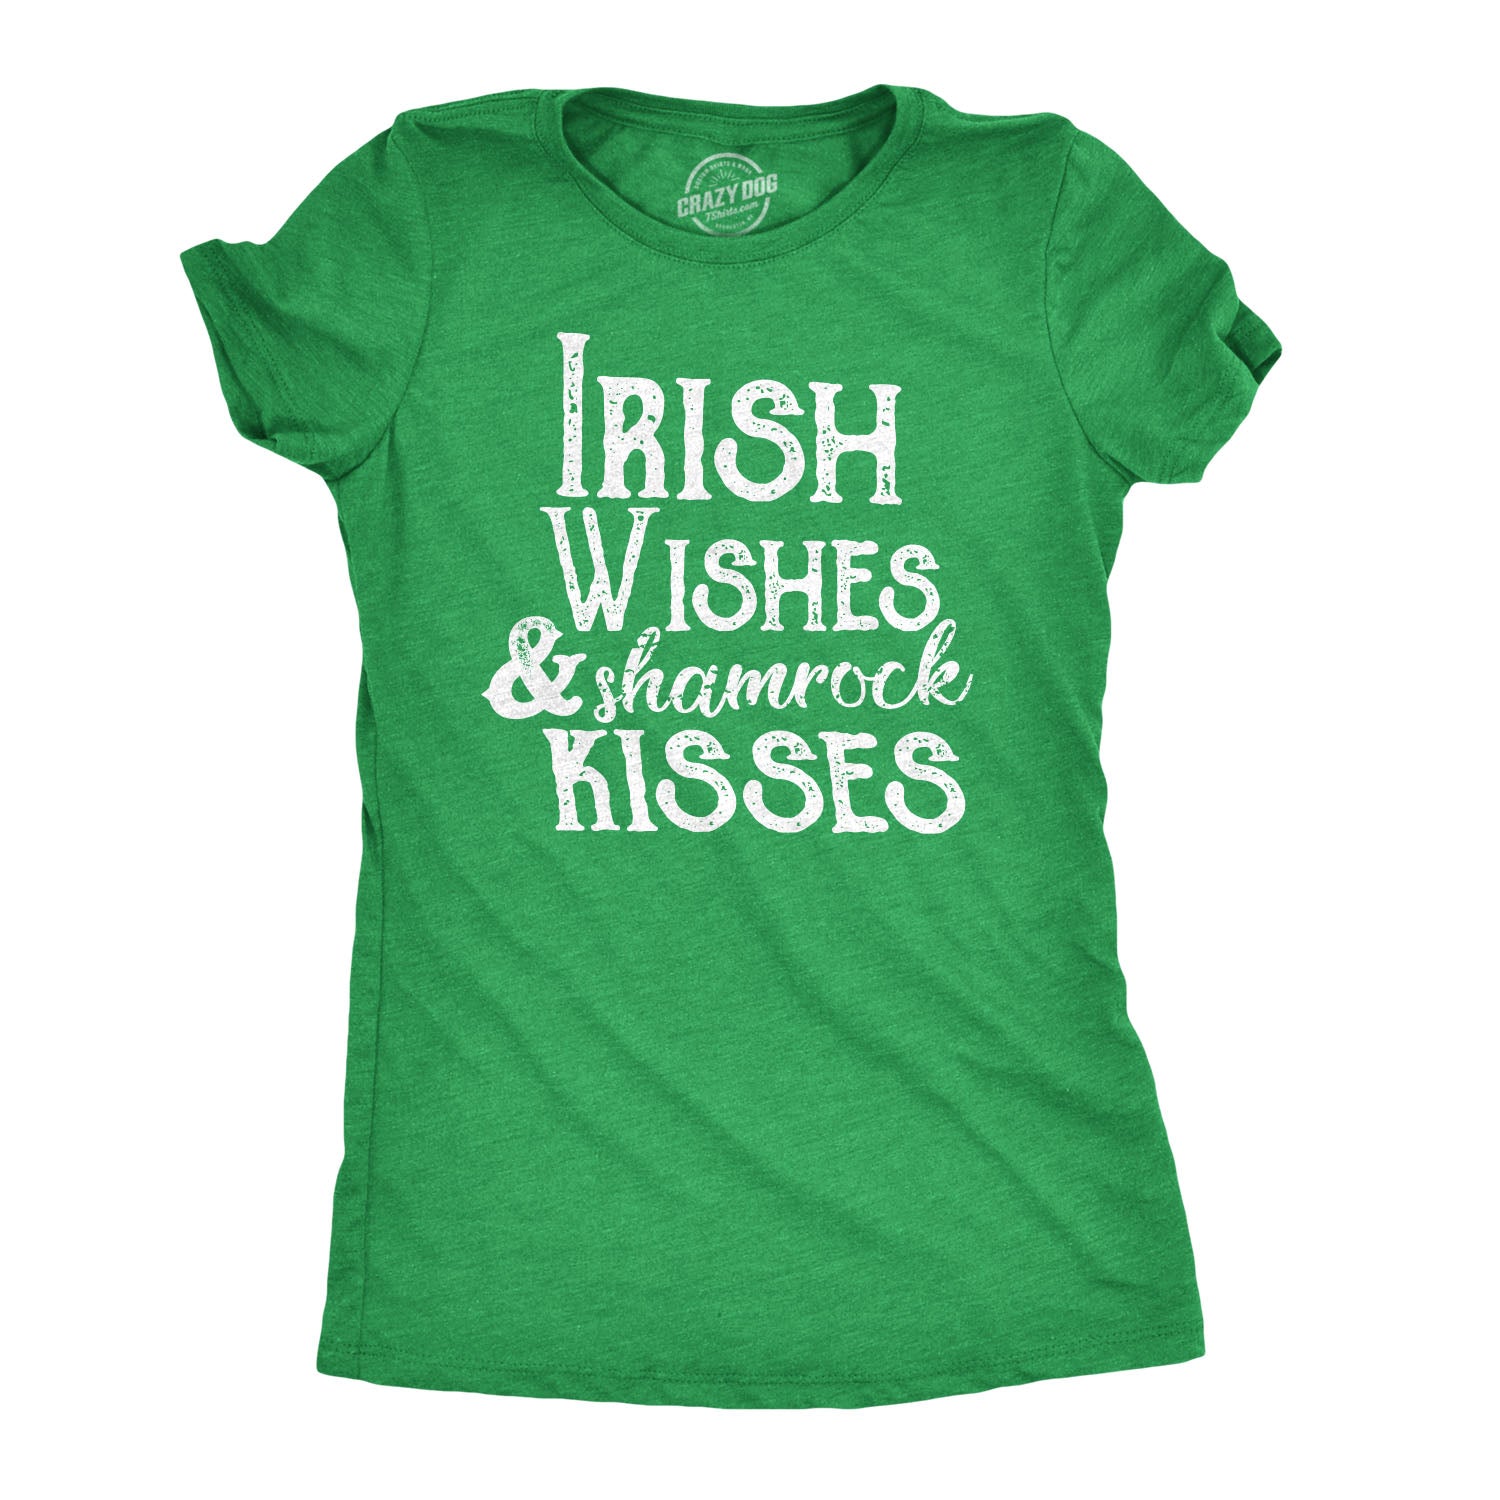 Funny Heather Green Irish Wishes And Shamrock Kisses Womens T Shirt Nerdy Saint Patrick's Day Beer Drinking Tee